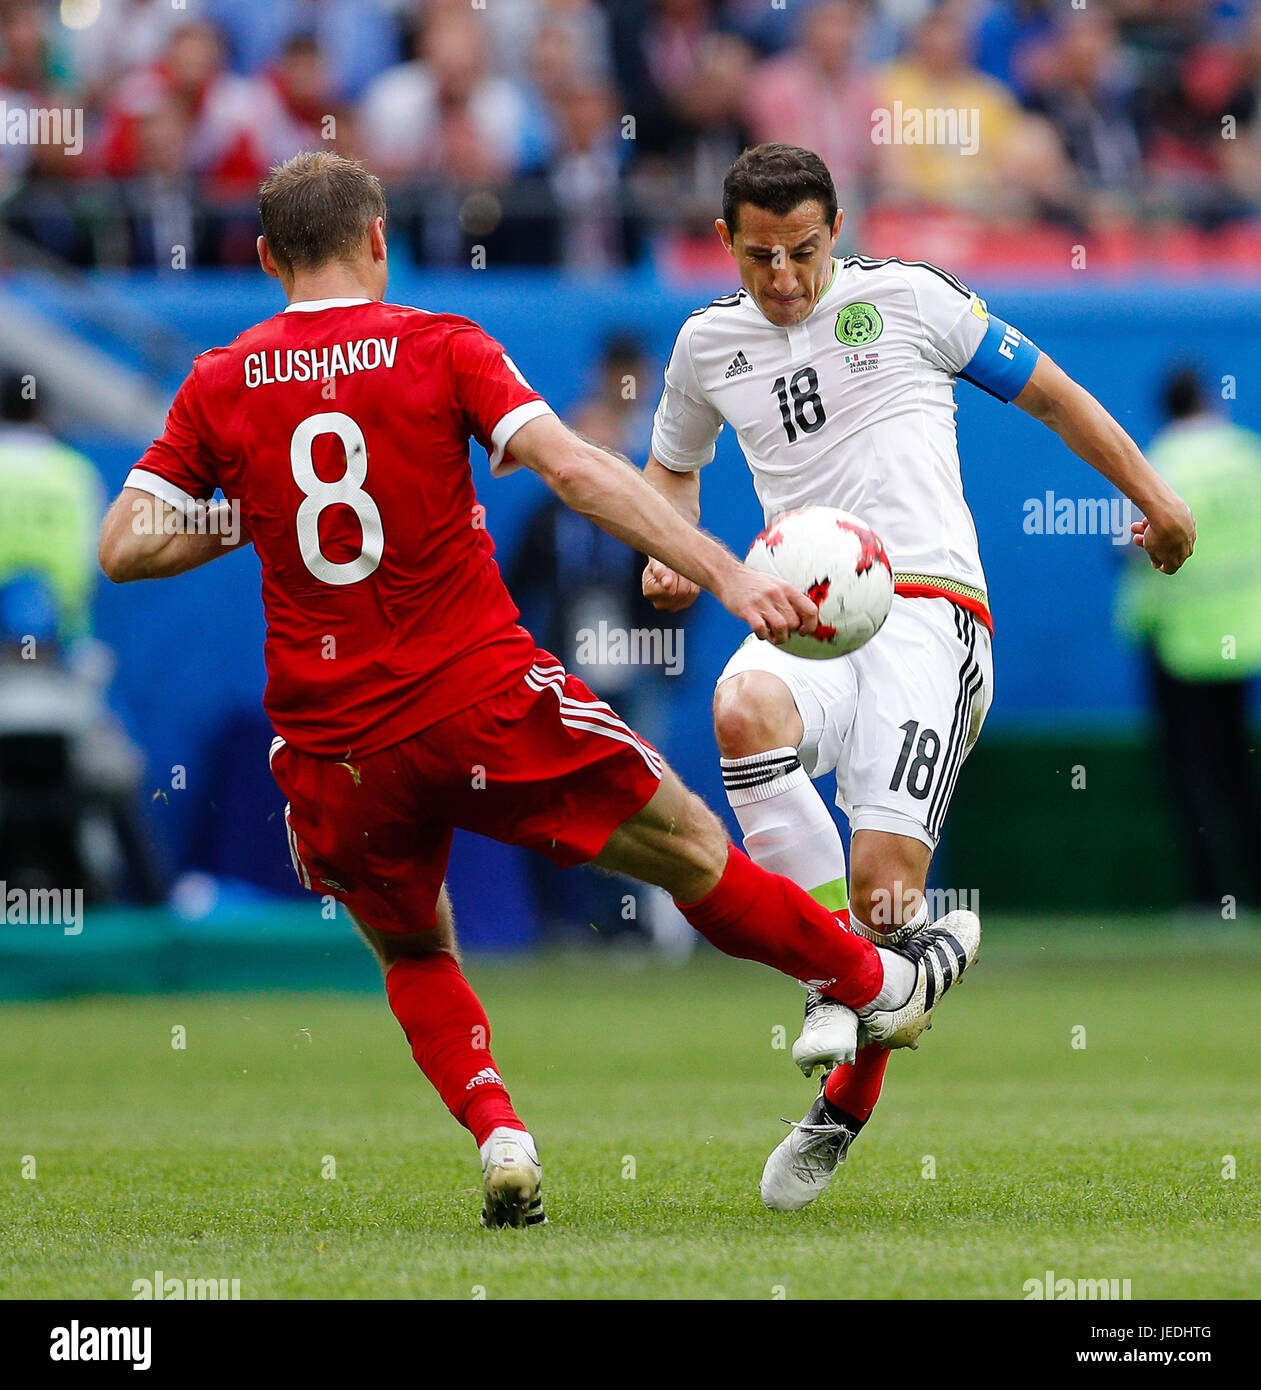 Kazan, Russia. 24th June, 2017. GLUSHAKOV Denis of Russia commits foul on GUARDADO Andres of Mexico during a match between Mexico and Russia valid for the third round of the Confederations Cup 2017, this Saturday (24) held Arena Kazan in Kazan, Russia. (Photo: Marcelo Machado de Melo/Fotoarena) Credit: Foto Arena LTDA/Alamy Live News Stock Photo